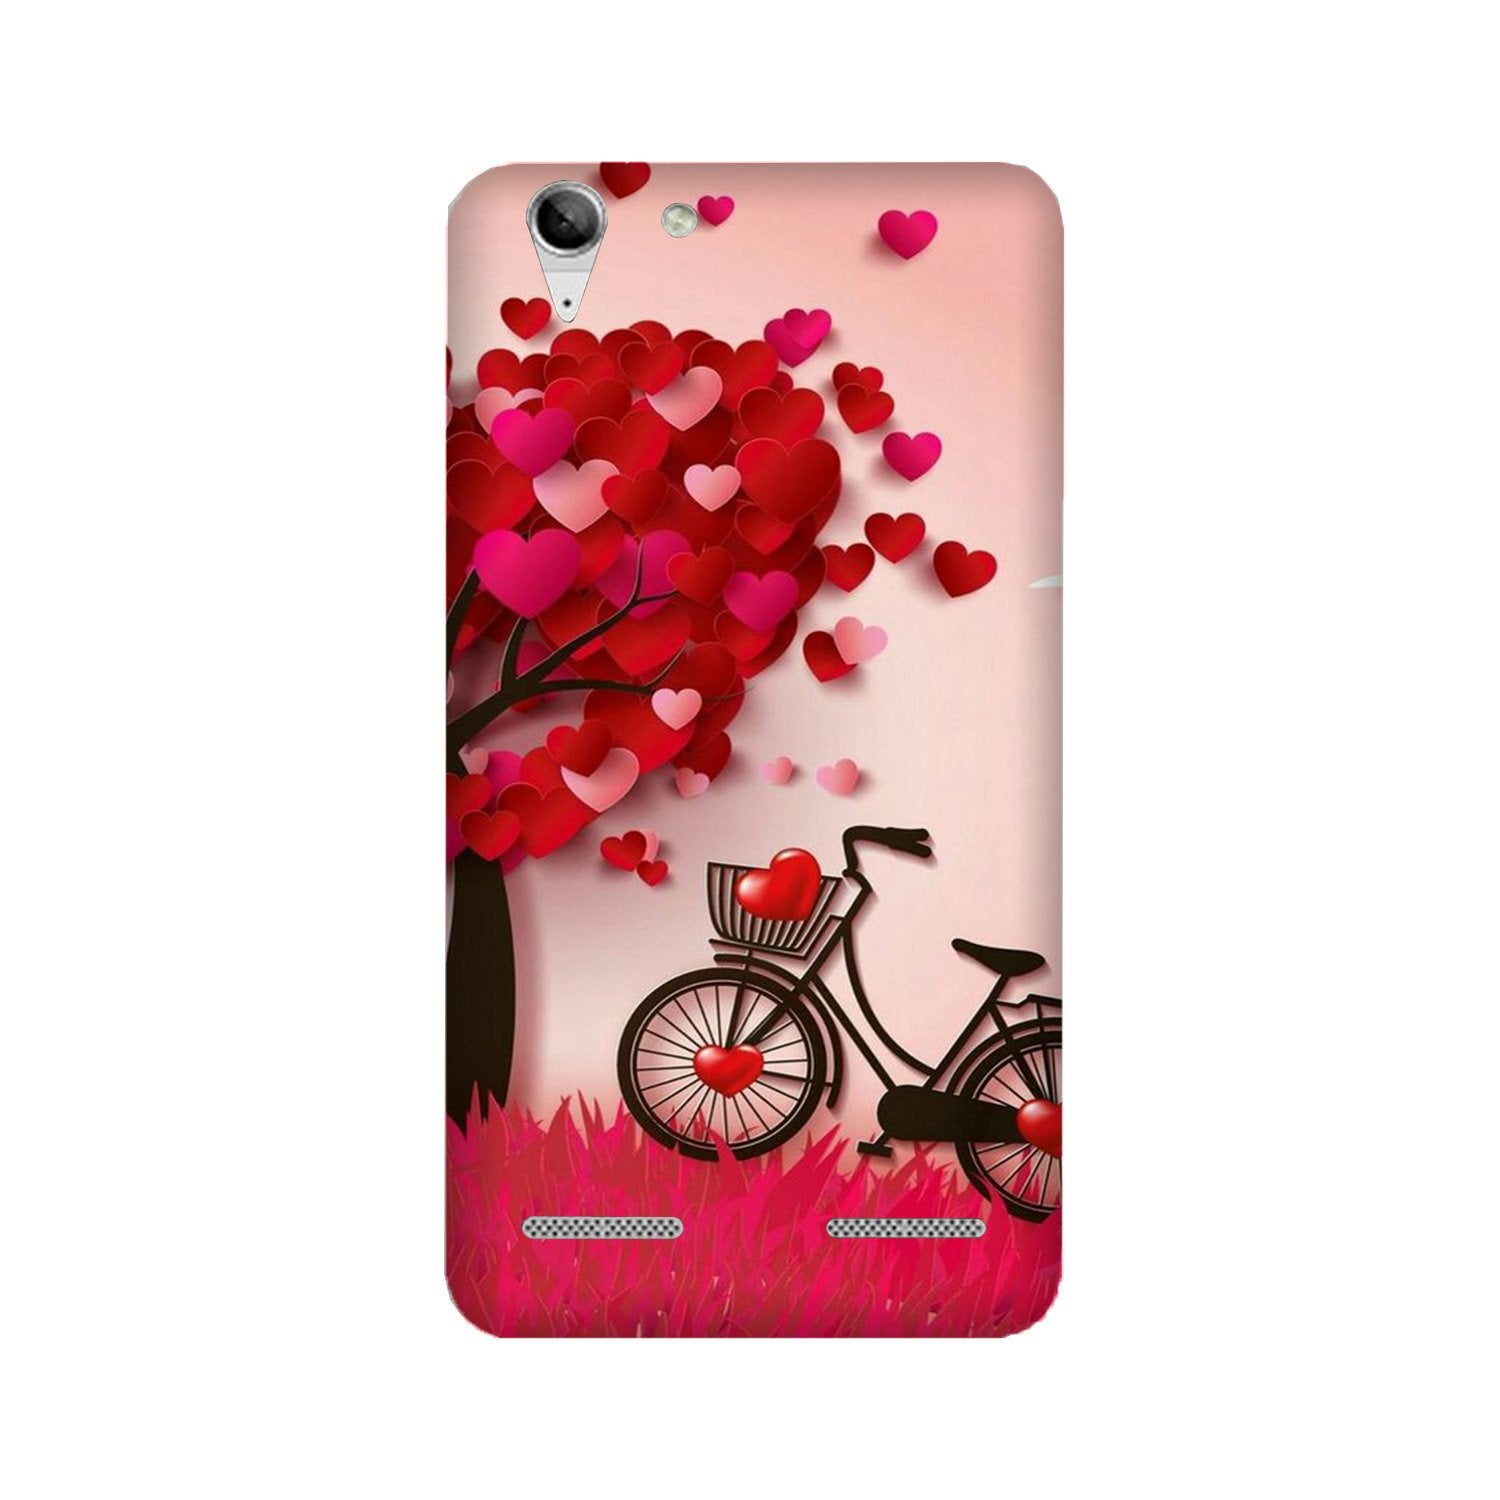 Red Heart Cycle Case for Lenovo K5 / K5 Plus (Design No. 222)